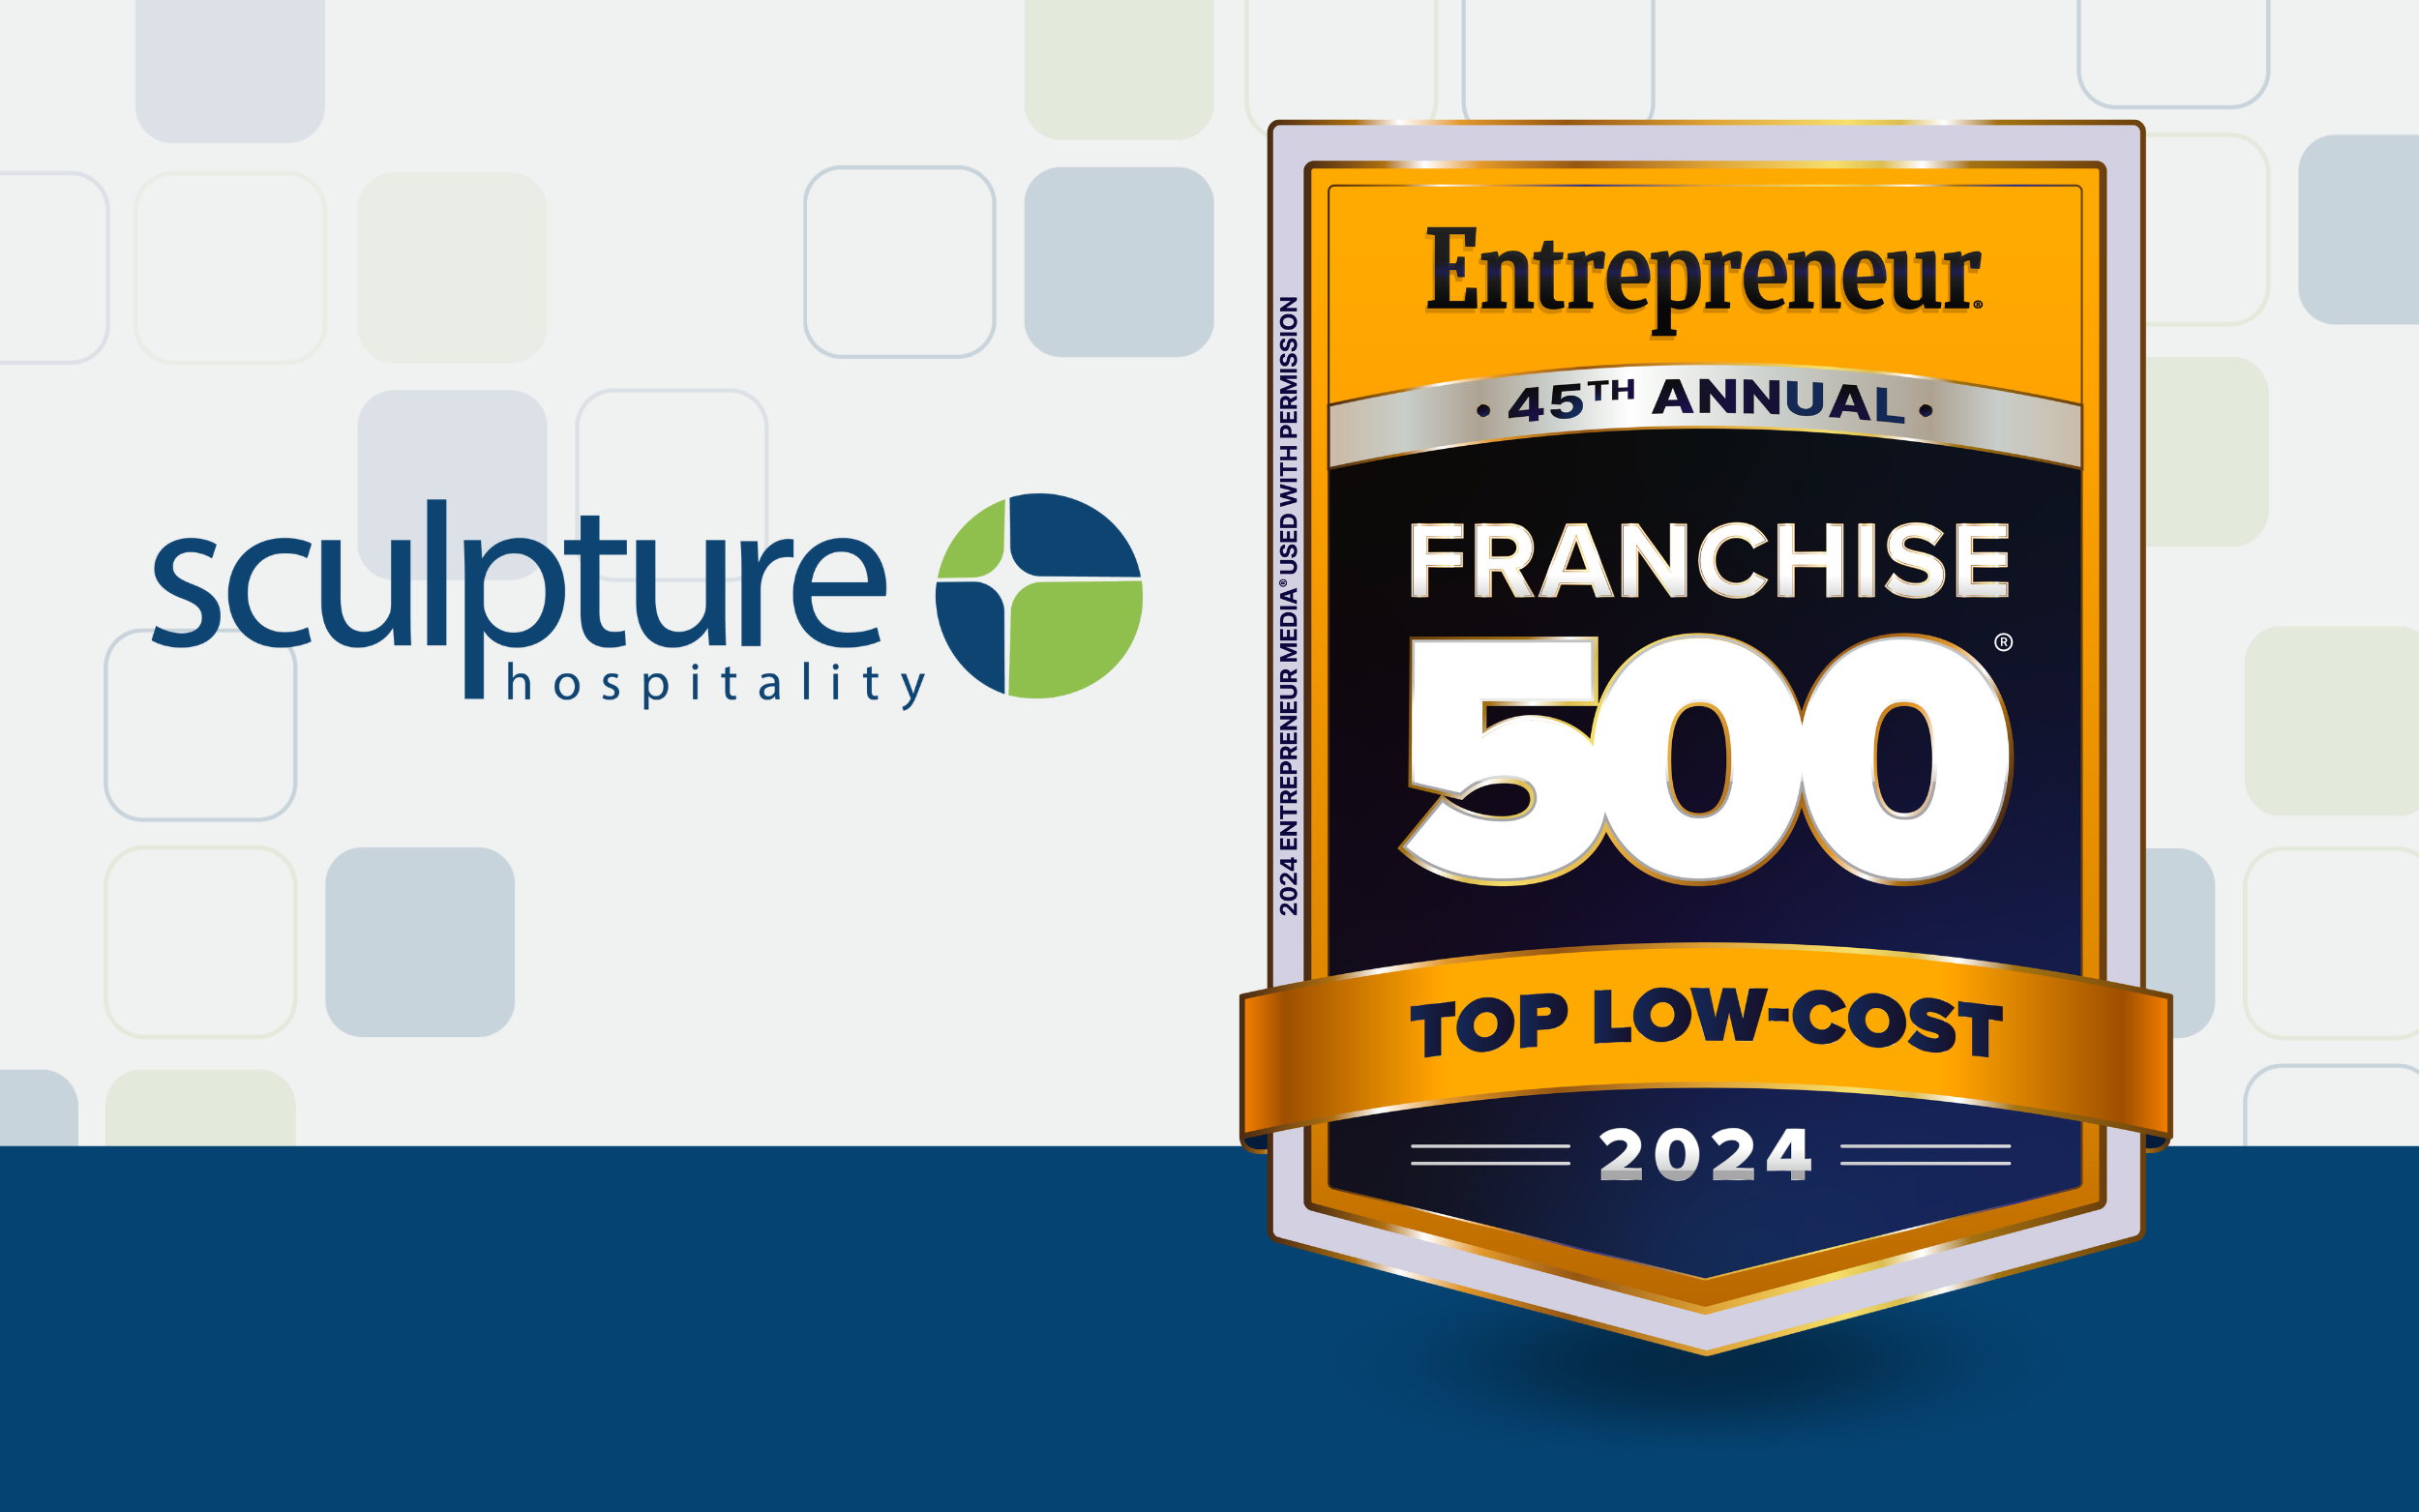 Sculpture Hospitality Ranked as a Top Low-Cost Franchise